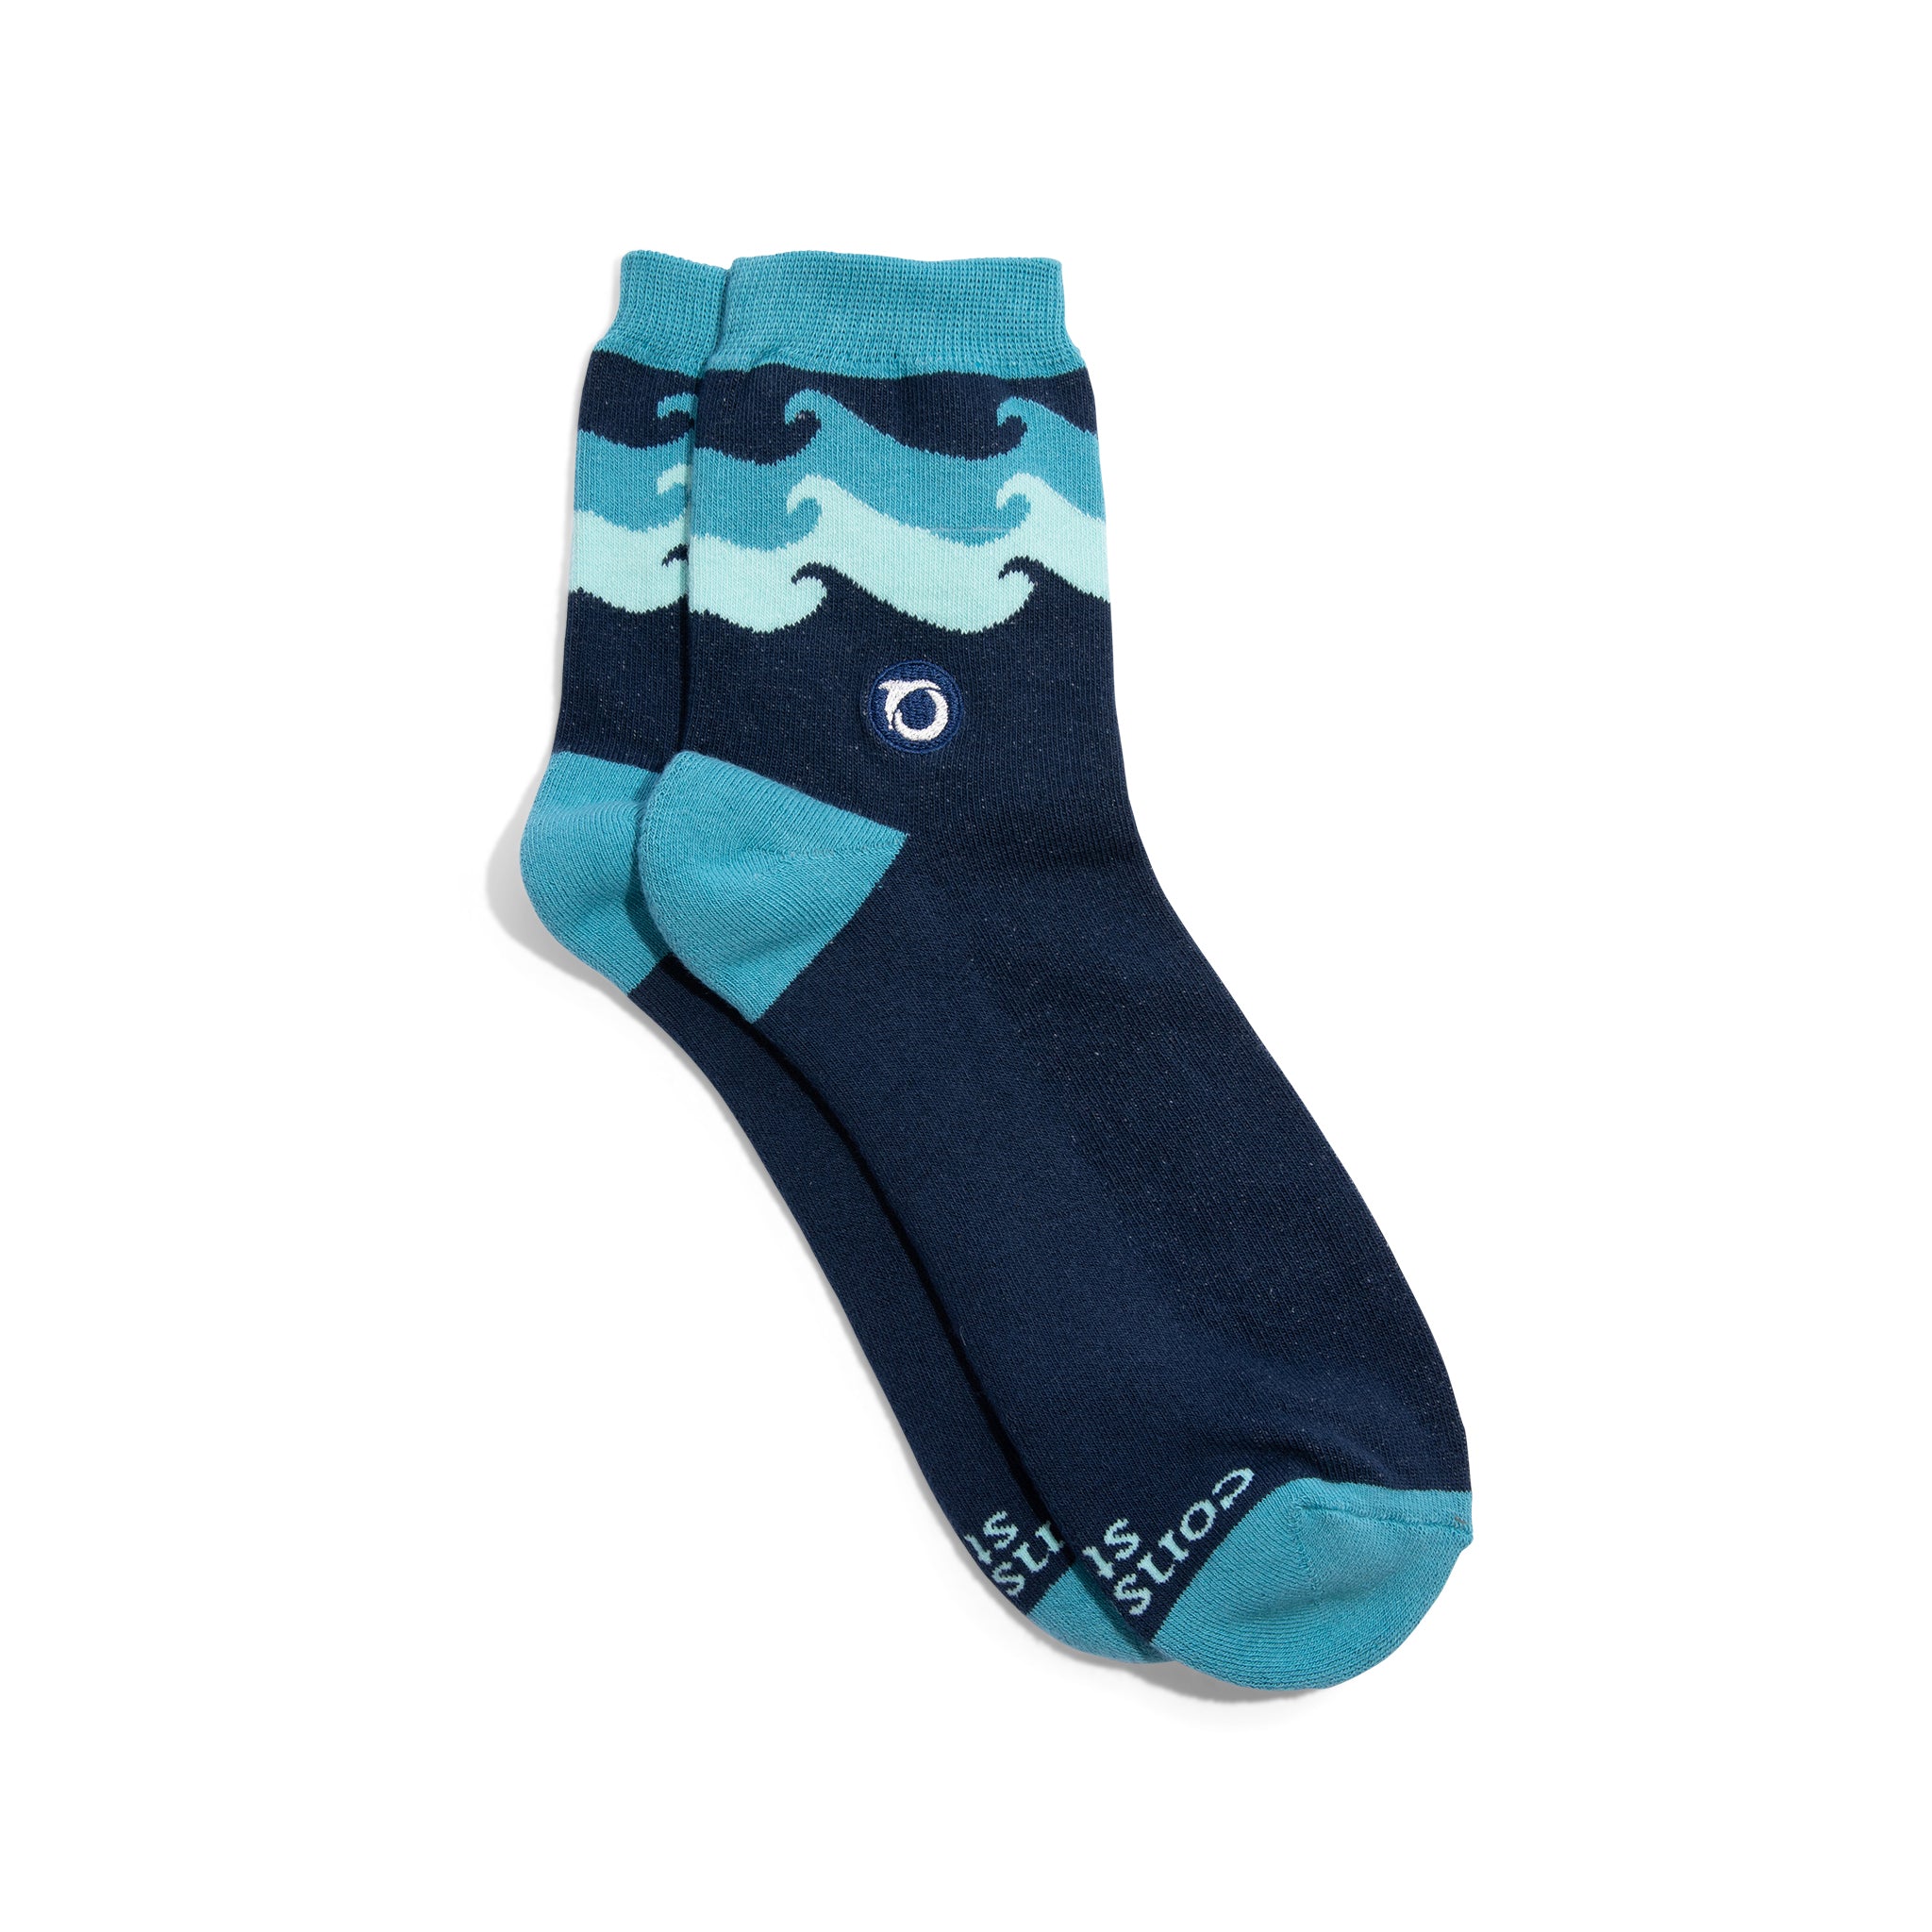 Eco-Friendly Recycled Socks by Conscious Step in a wave pattern 